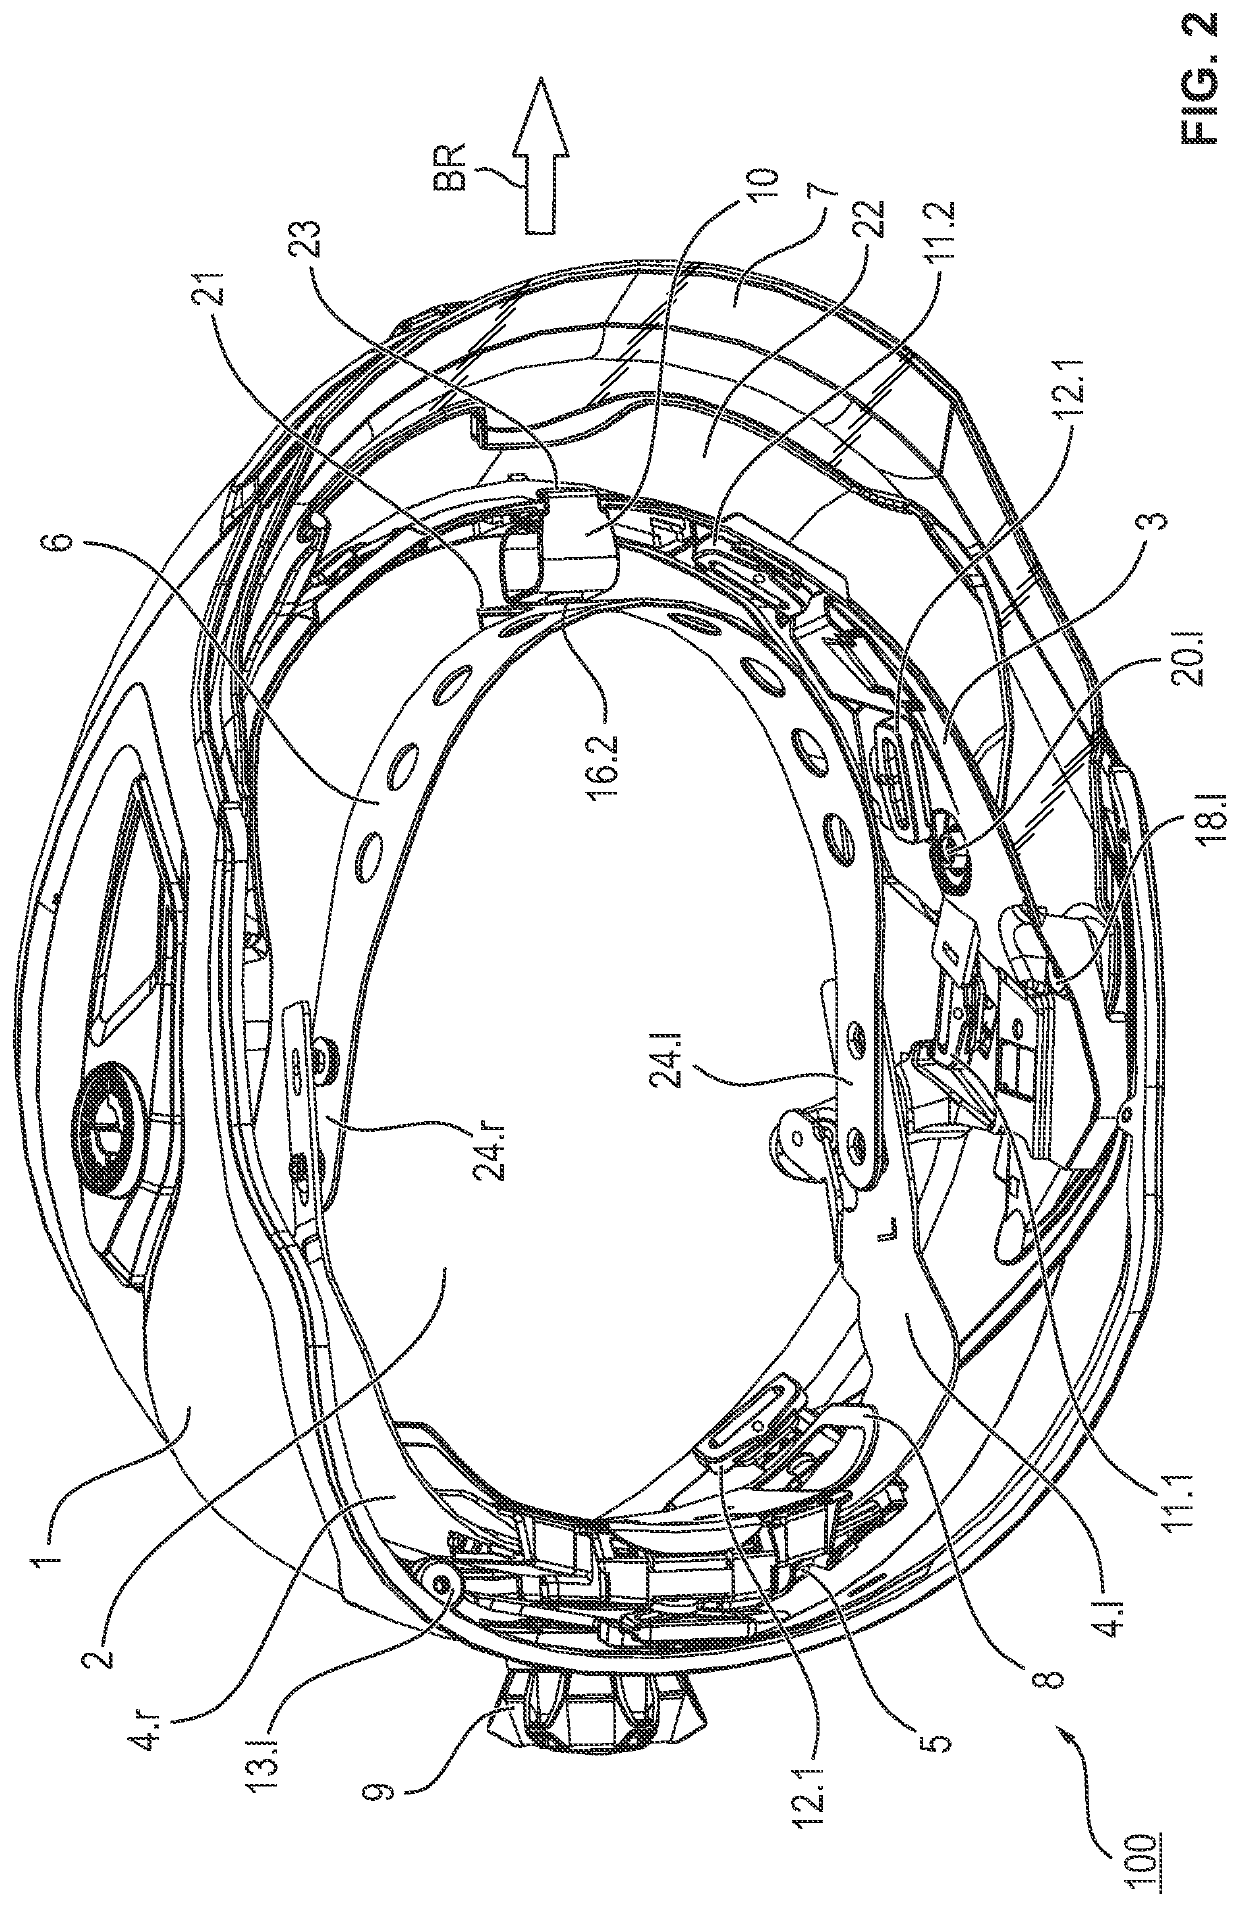 Safety helmet with mechanical coding for plug connections between the inner lining and the bearing structure